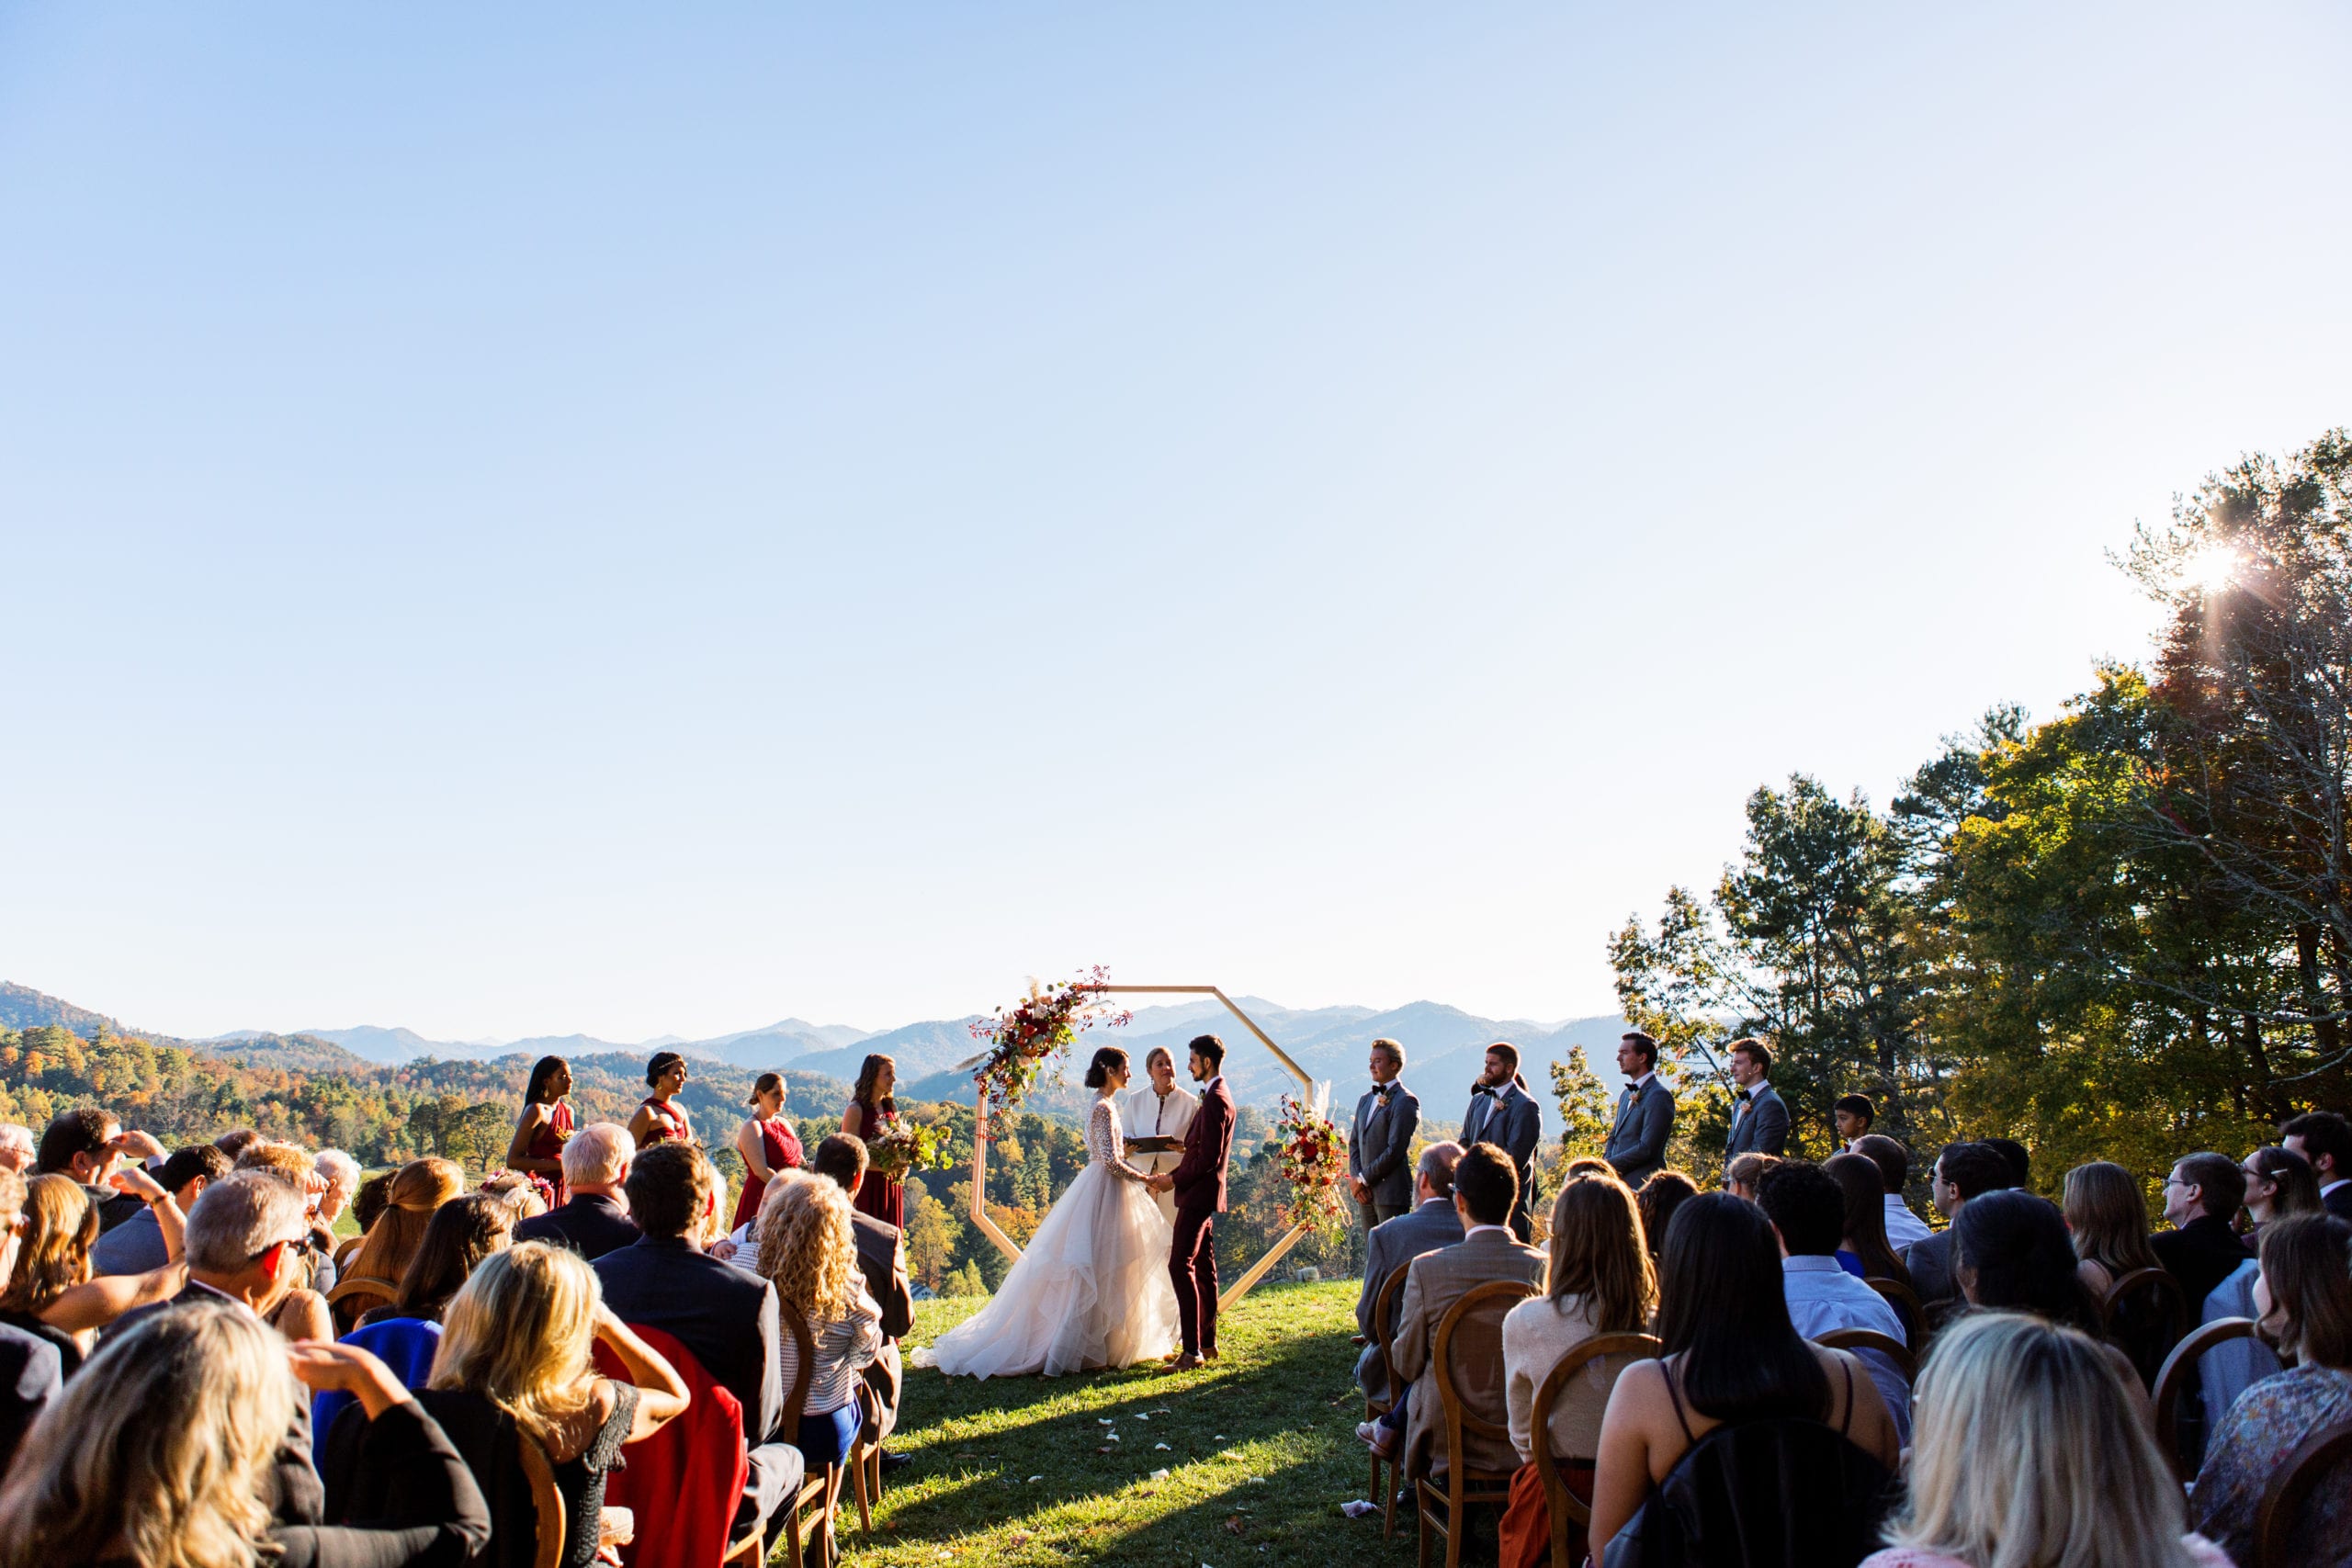 A gorgeous wedding view for the ceremony at the Ridge wedding Venue in Asheville NC